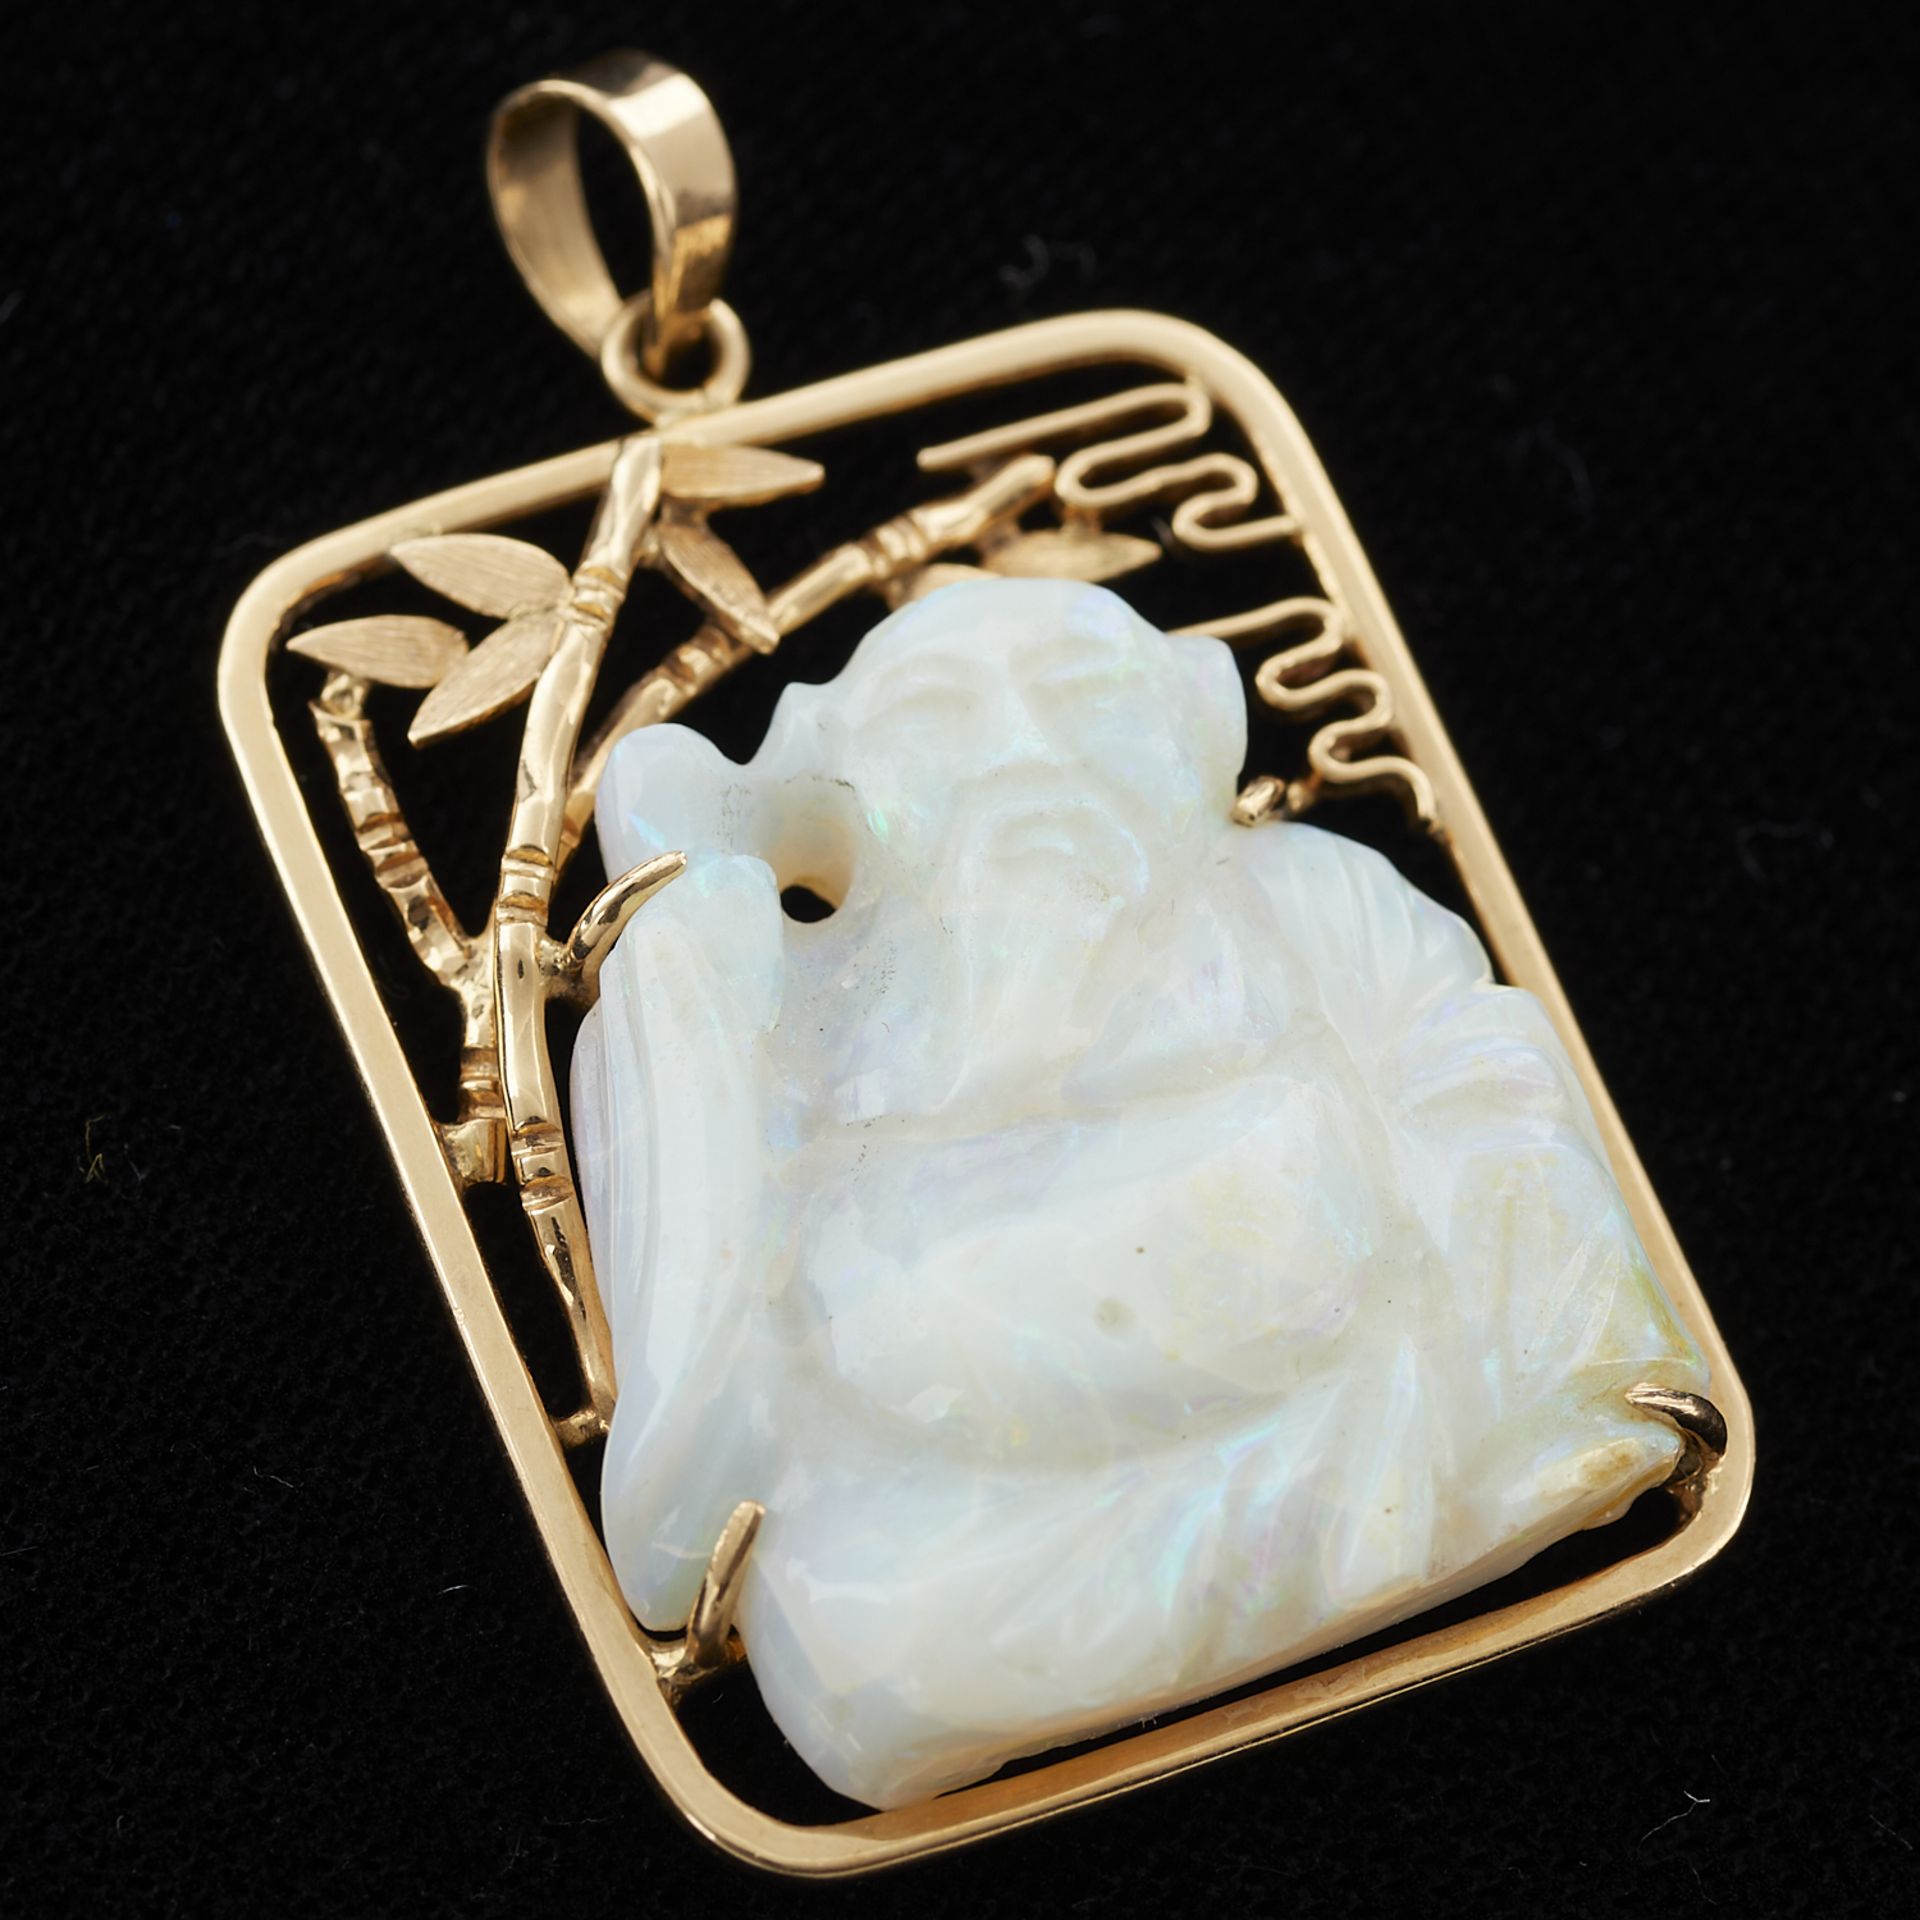 14k Yellow Gold Pendant w/ Carved Opal Buddha - Image 3 of 6